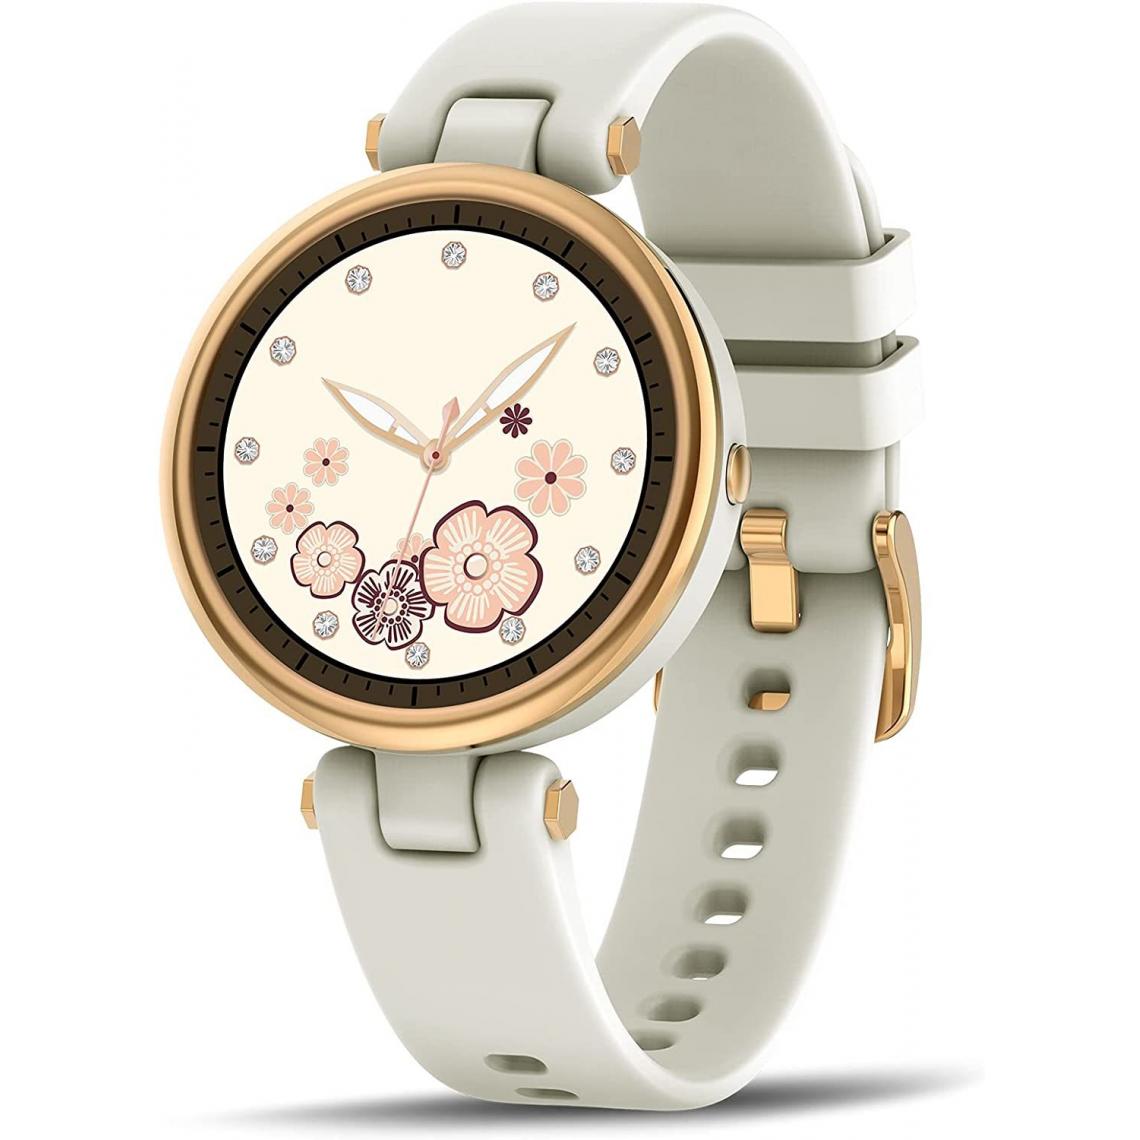 Chronotech Montres - Chronus Connect Watch for Women, Waterproof IP67 Sport for Connected Watch(White) - Montre connectée